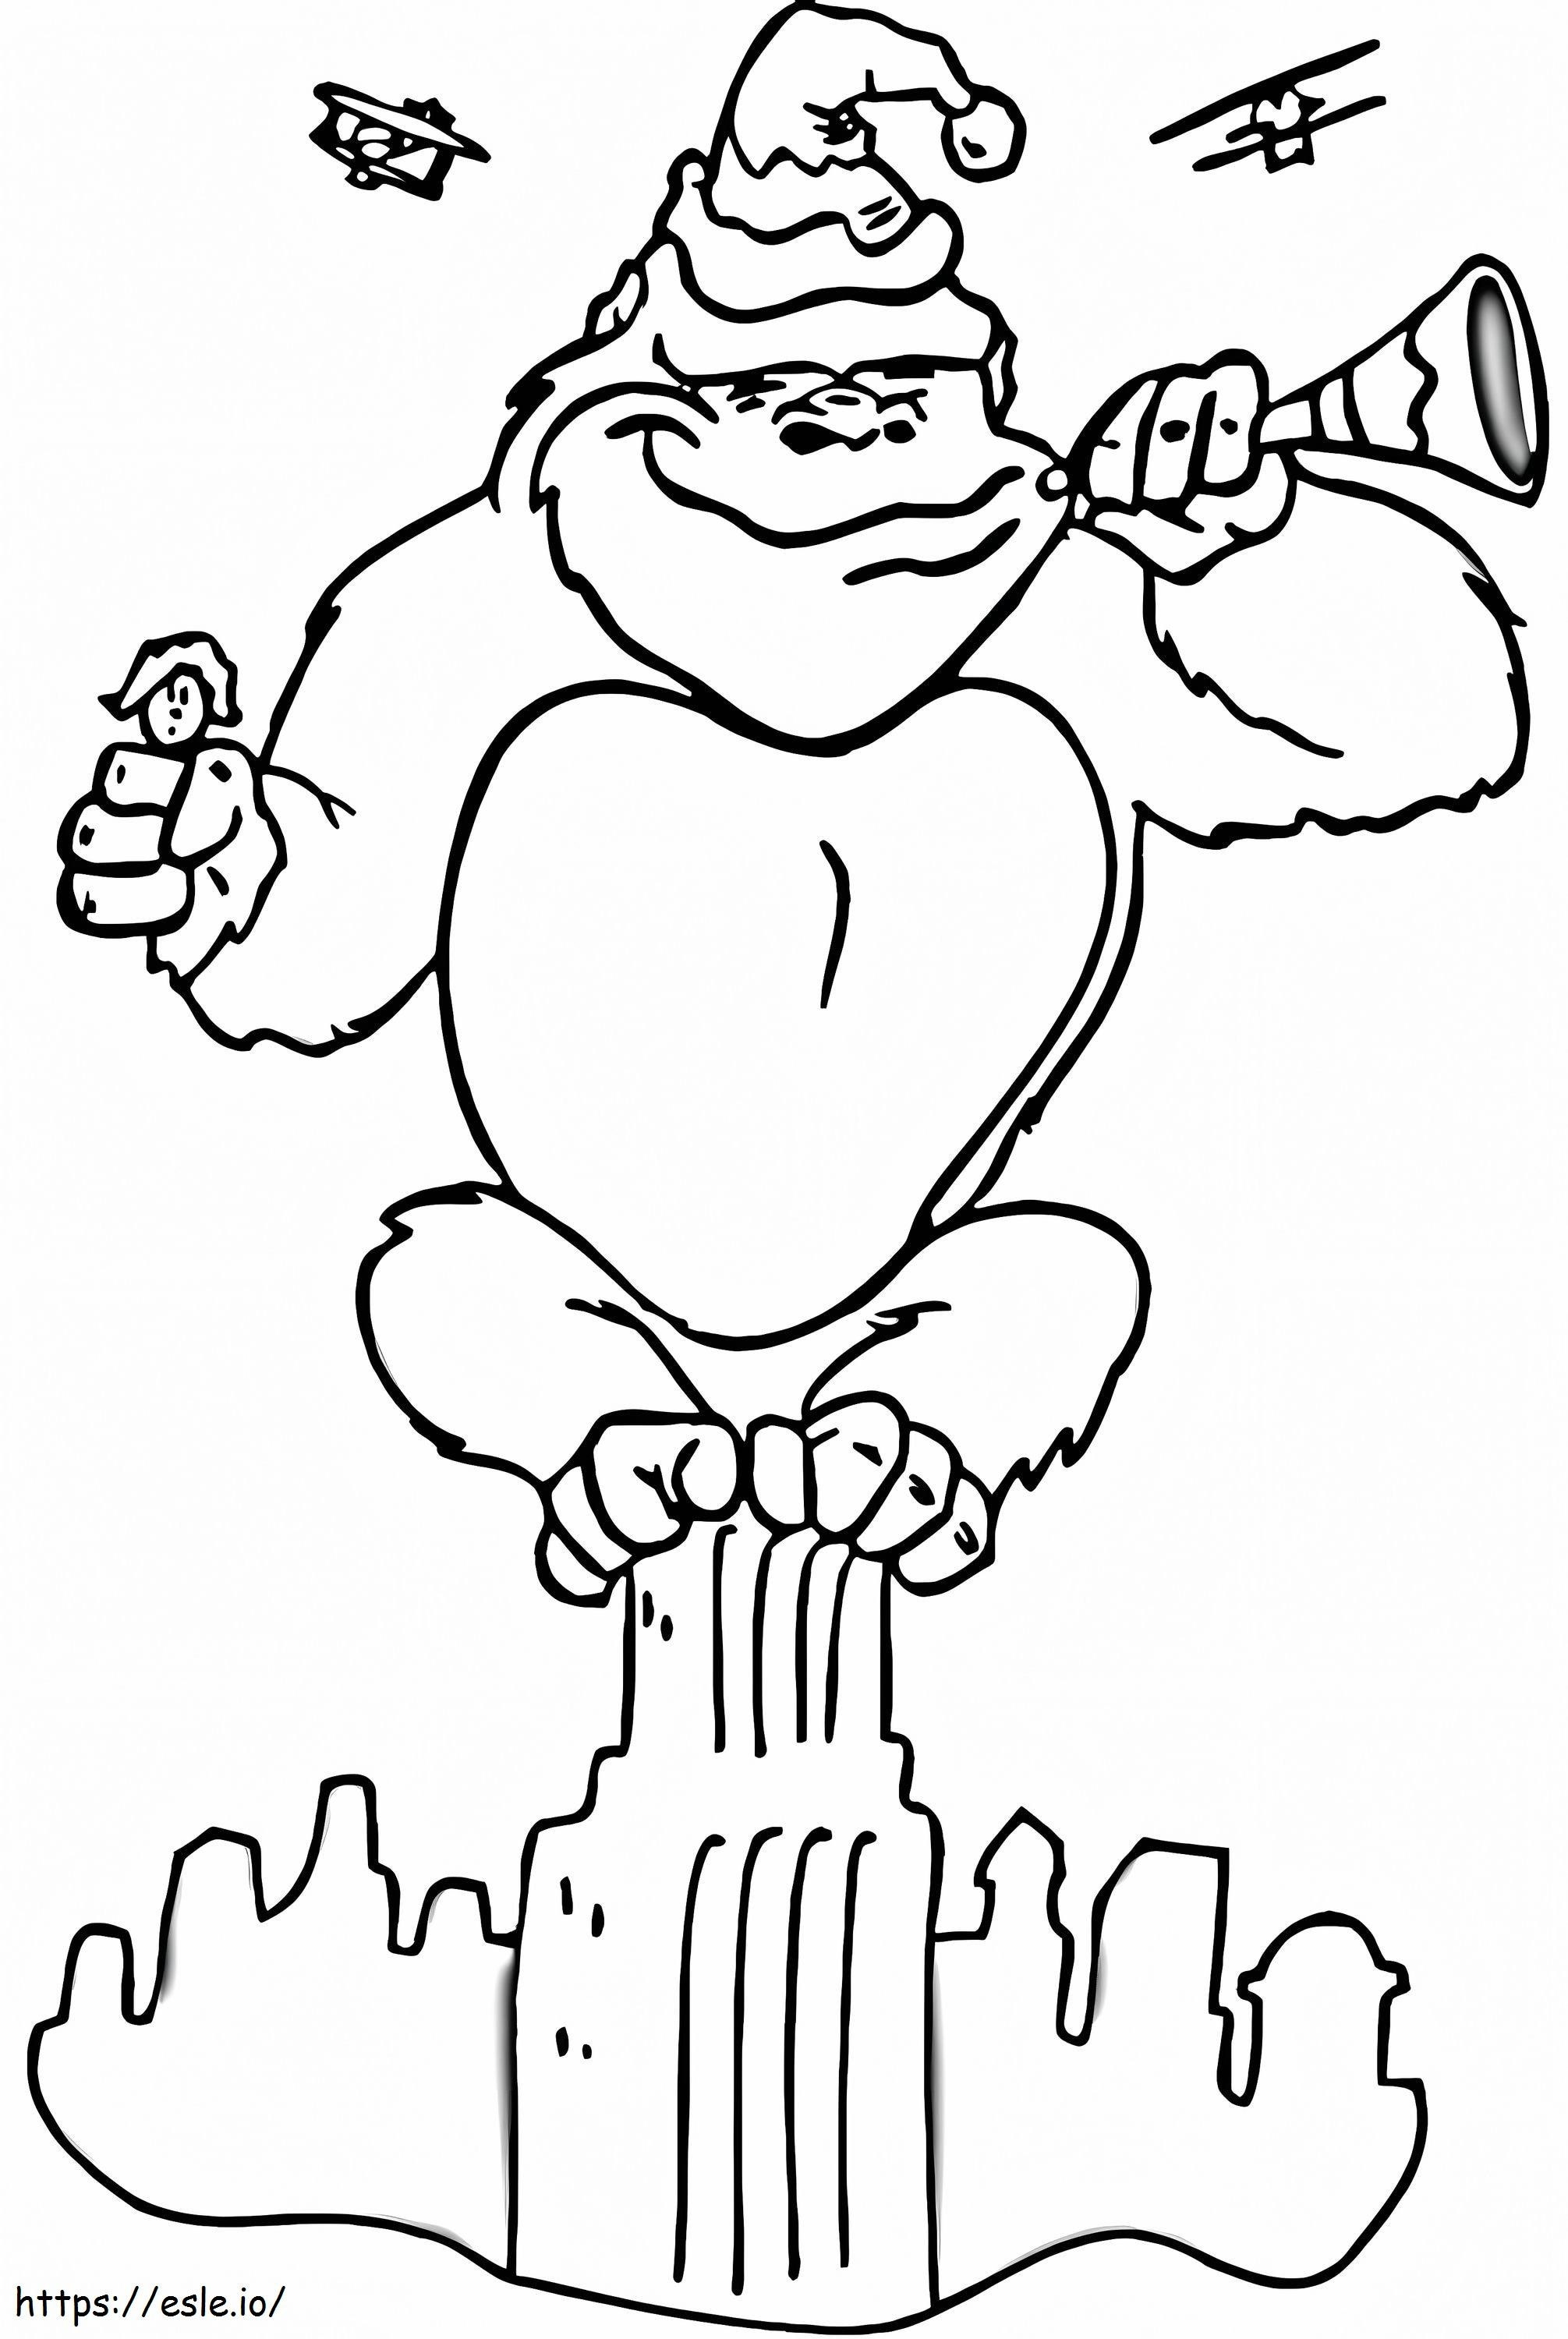 King Kong Is In The Building coloring page